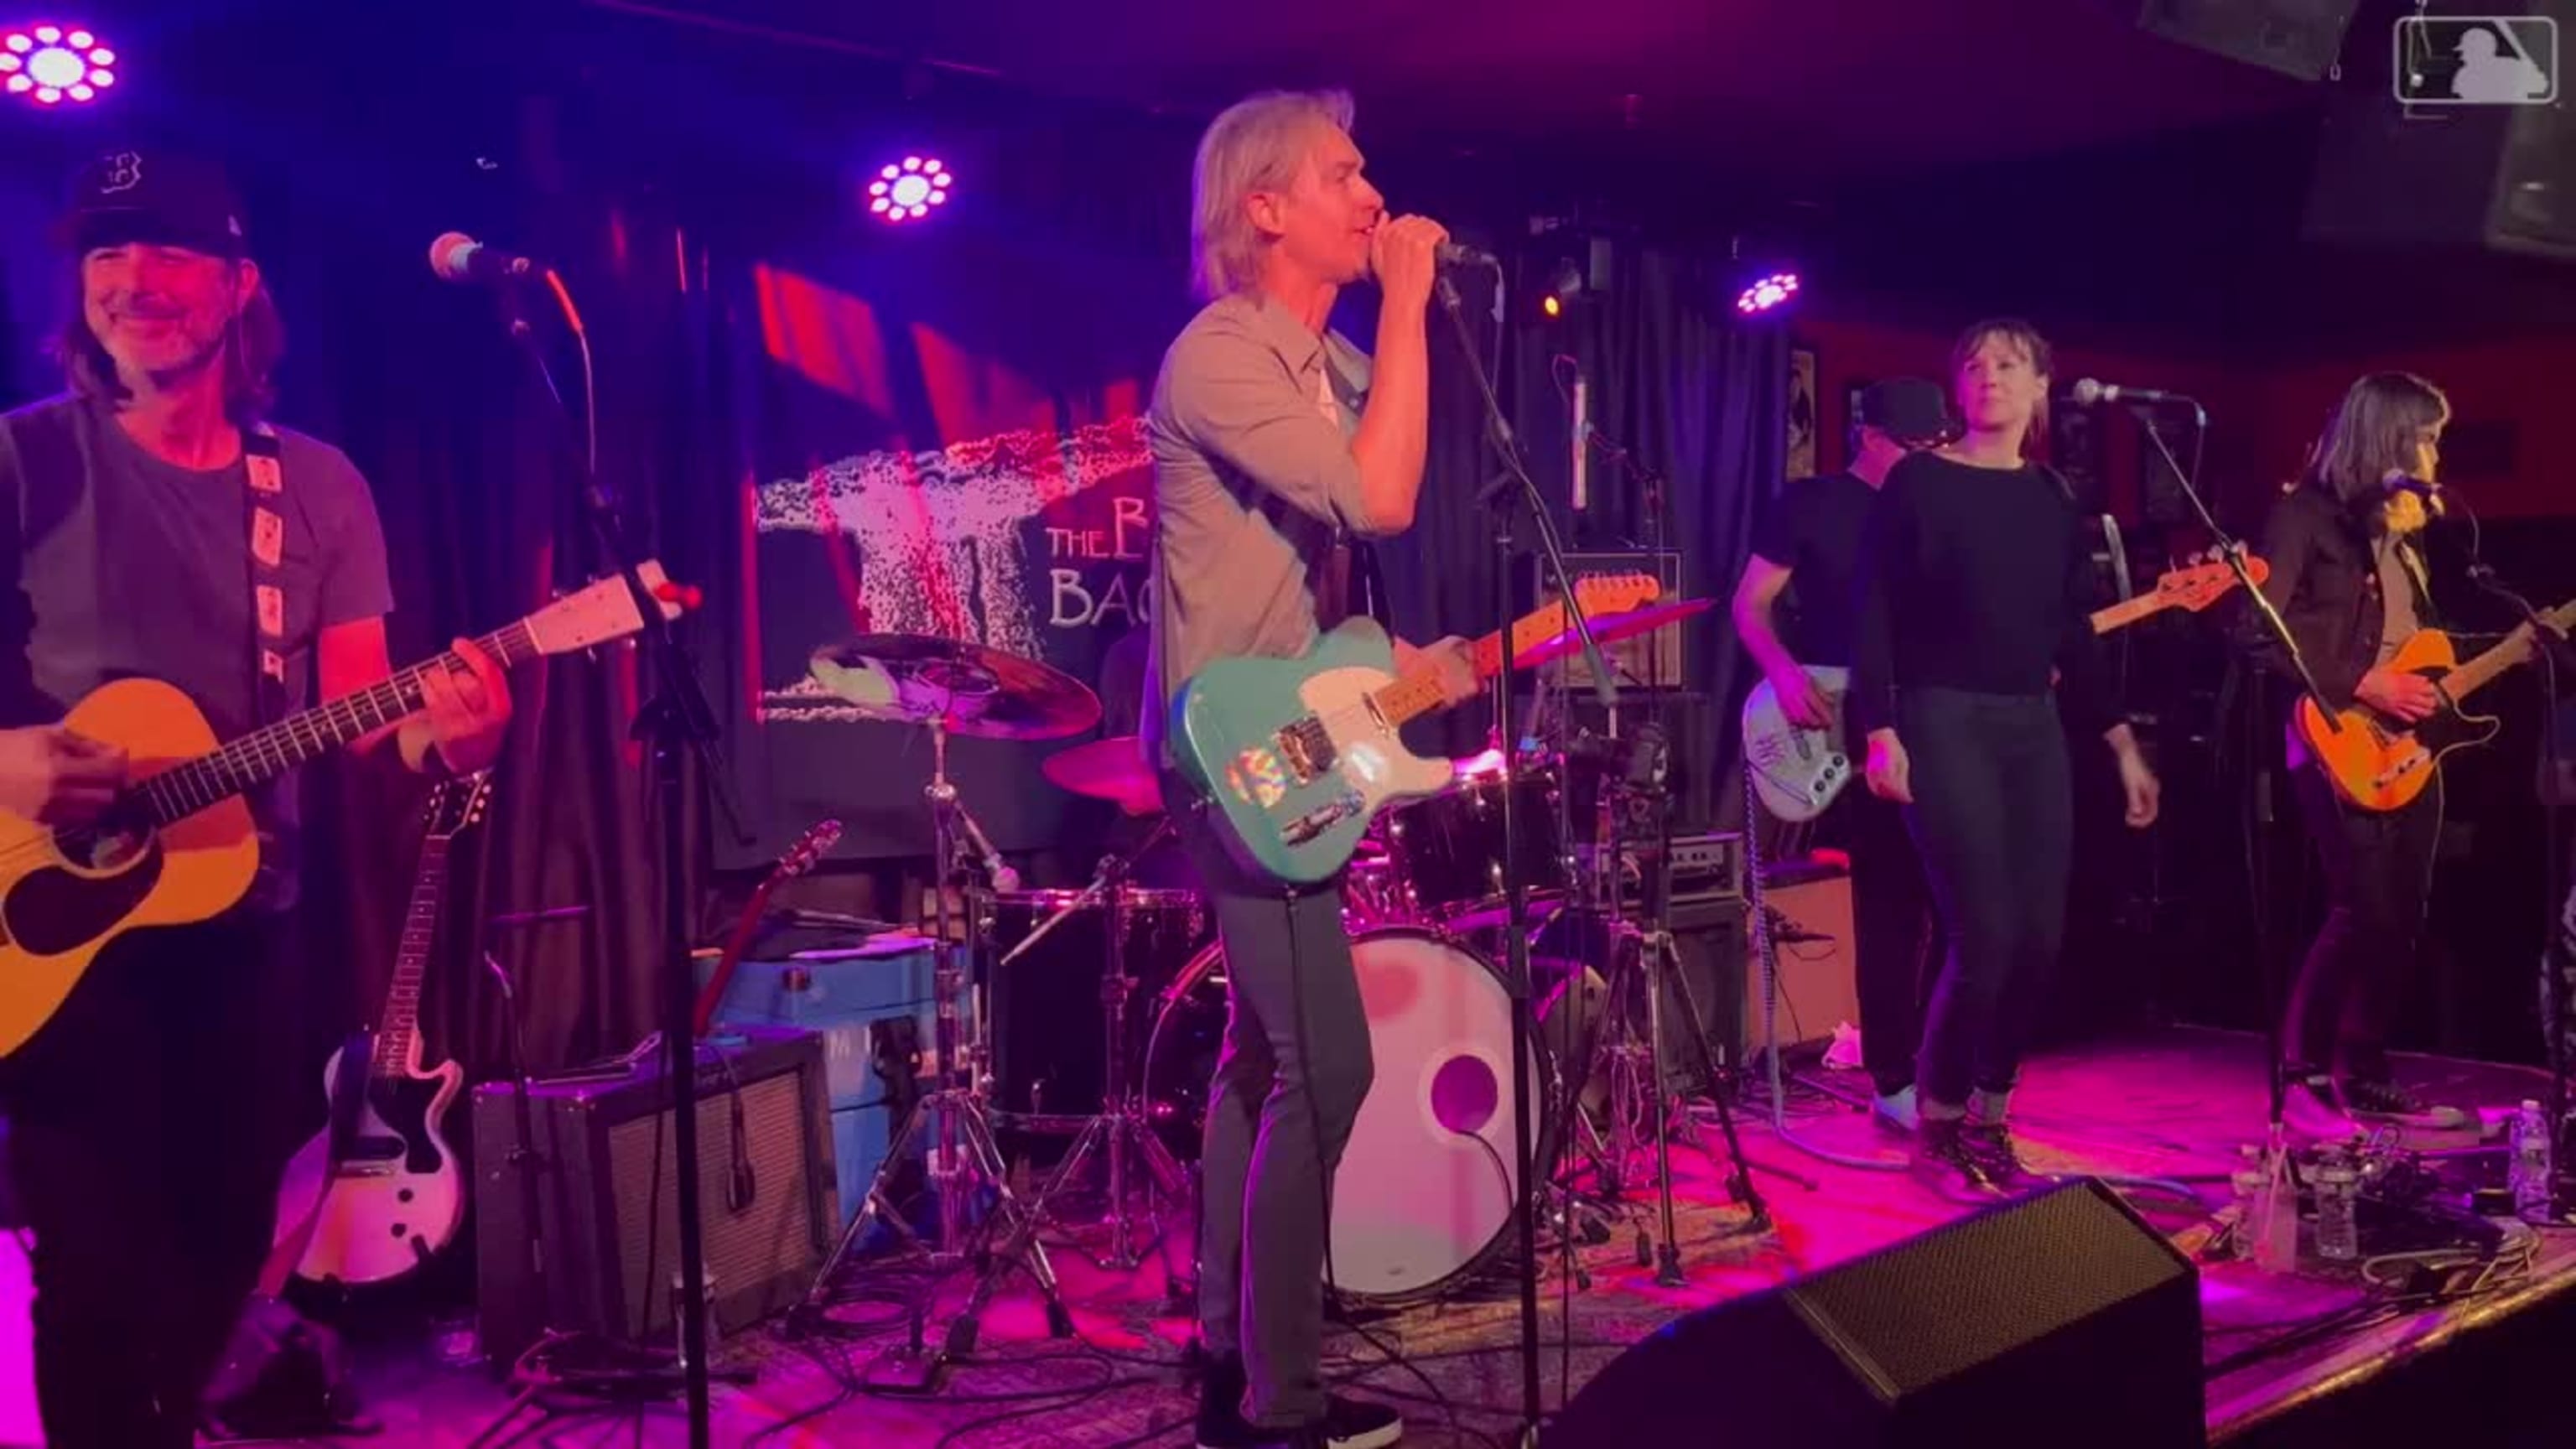 Bronson Arroyo, retired Reds pitcher, rocks out with new album